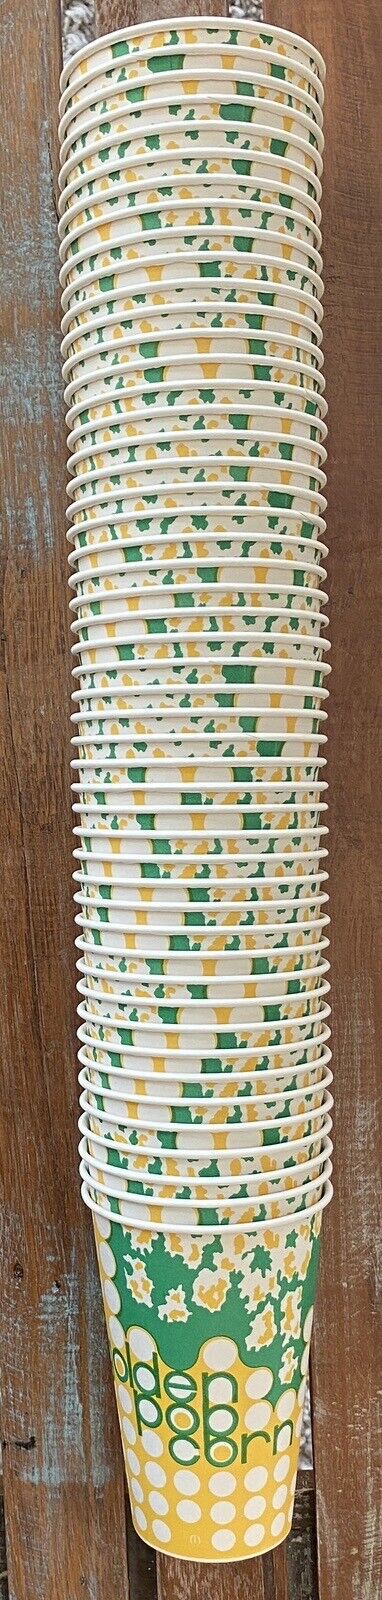 Vintage Tall Treated Golden Popcorn Design Cups by LILY Lot of 50 No18TL1V